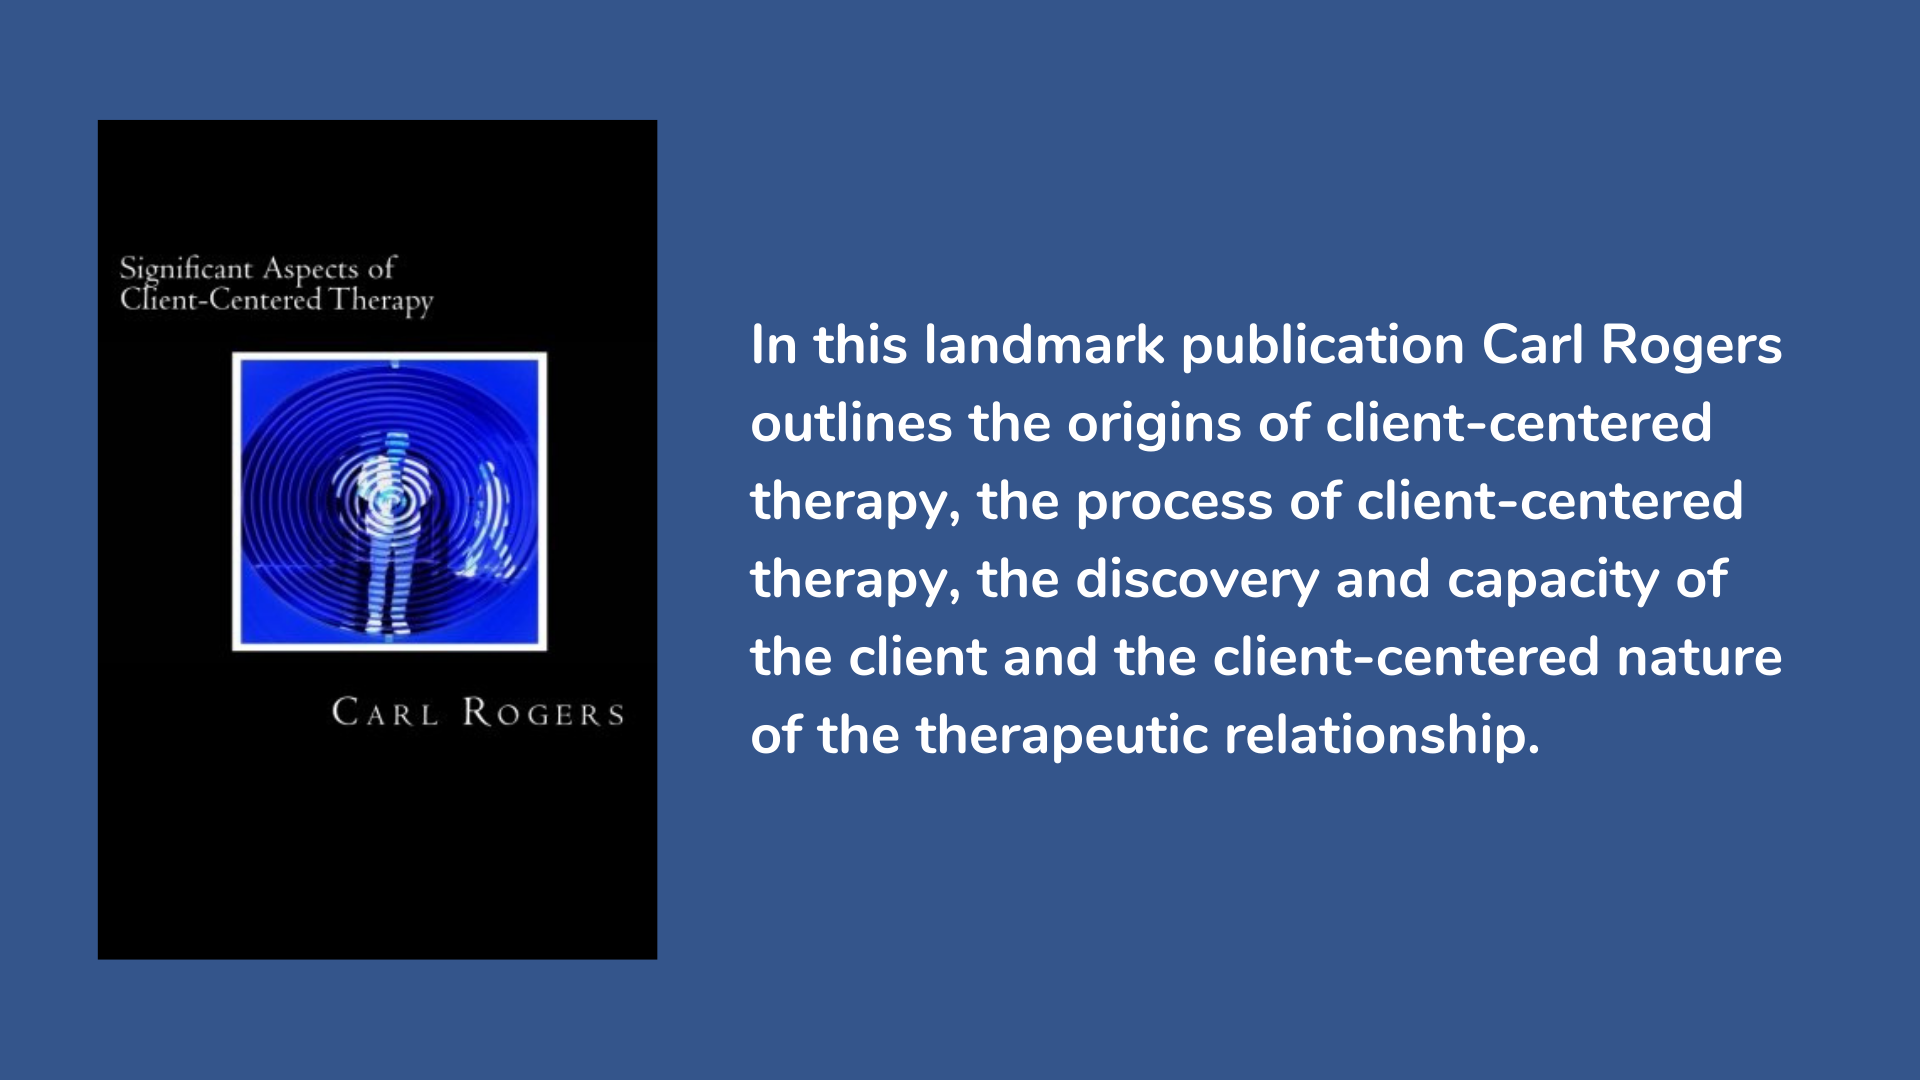 Significant Aspects of Client-Centered Therapy by Carl Rogers, Book Cover and Description